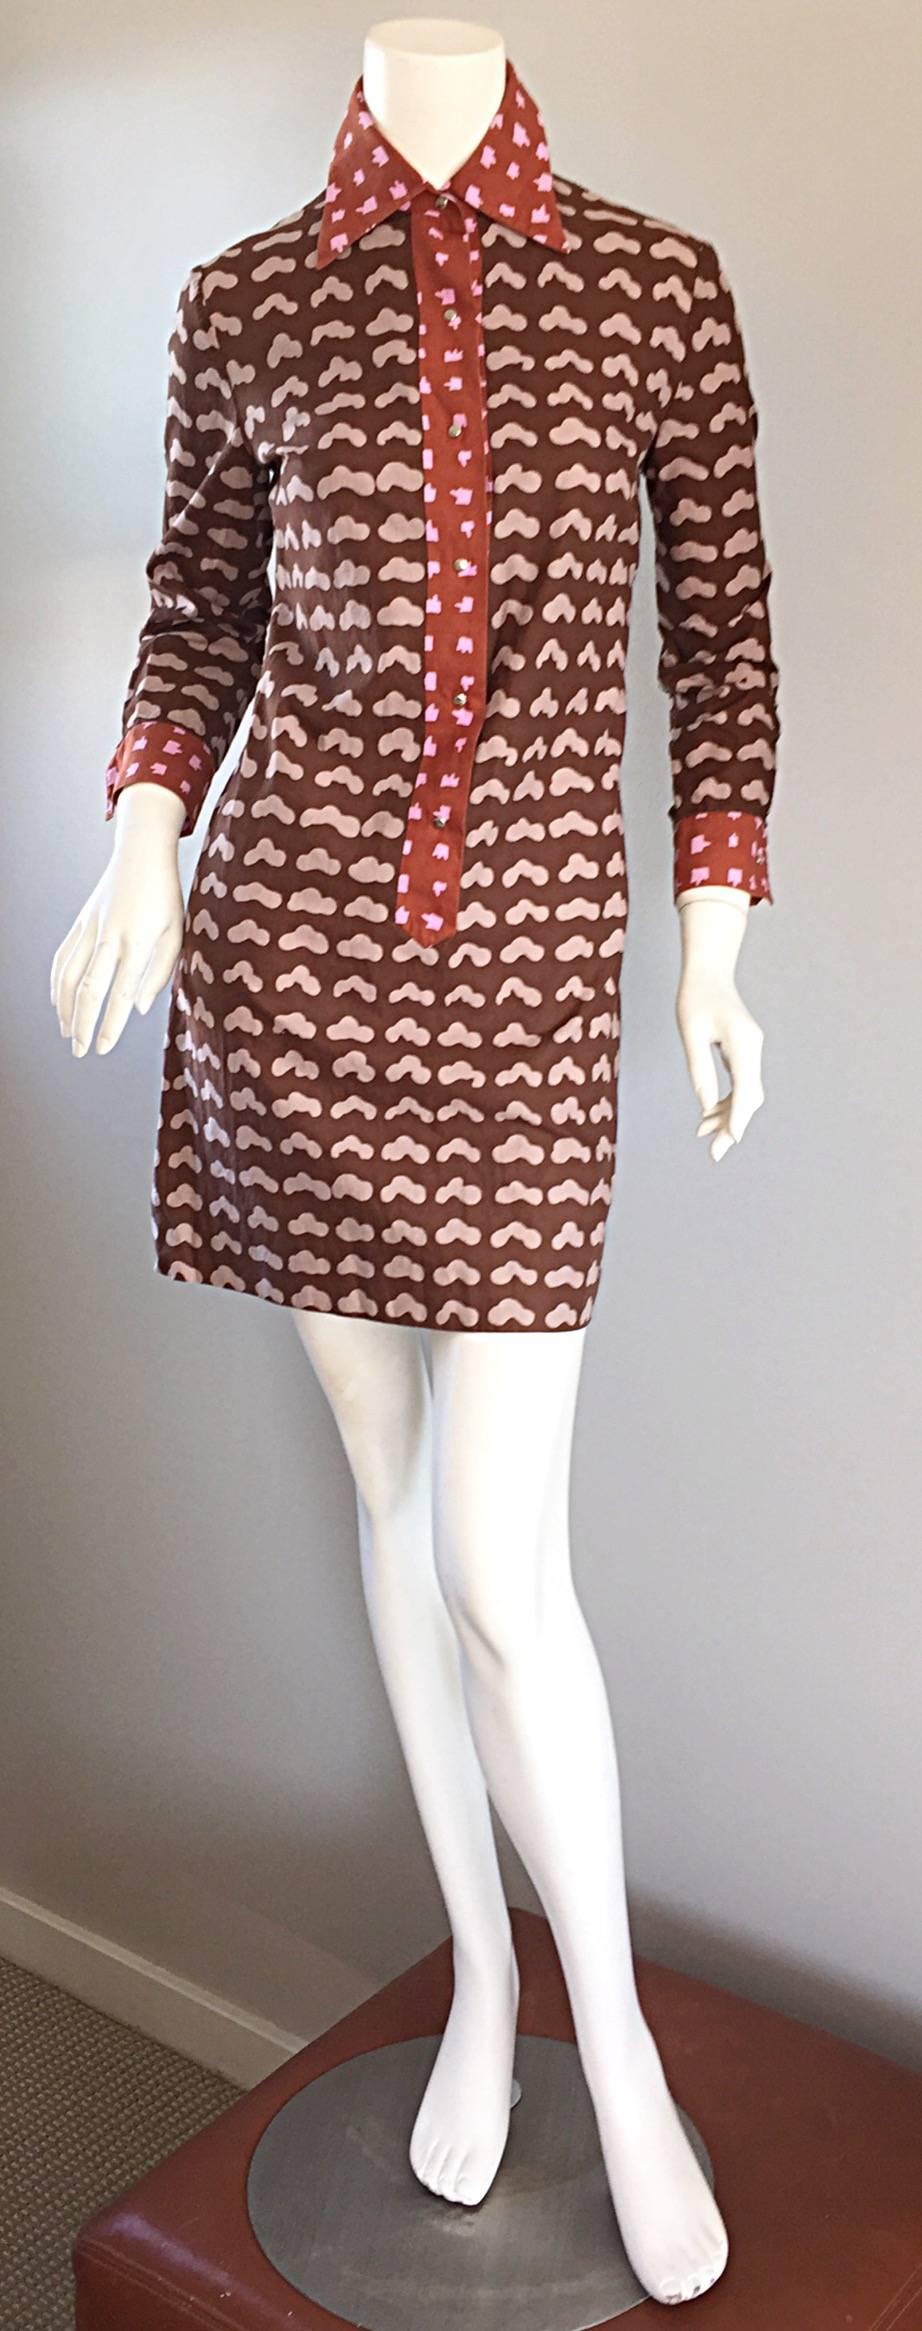 

The perfect cotton shirt dress, from Marimekko of Finland! Label is dated from 1969. Early Marimekko pieces like this are becoming harder and harder to find, and are considered highly collectible. Burgundy/brown background, with light pink